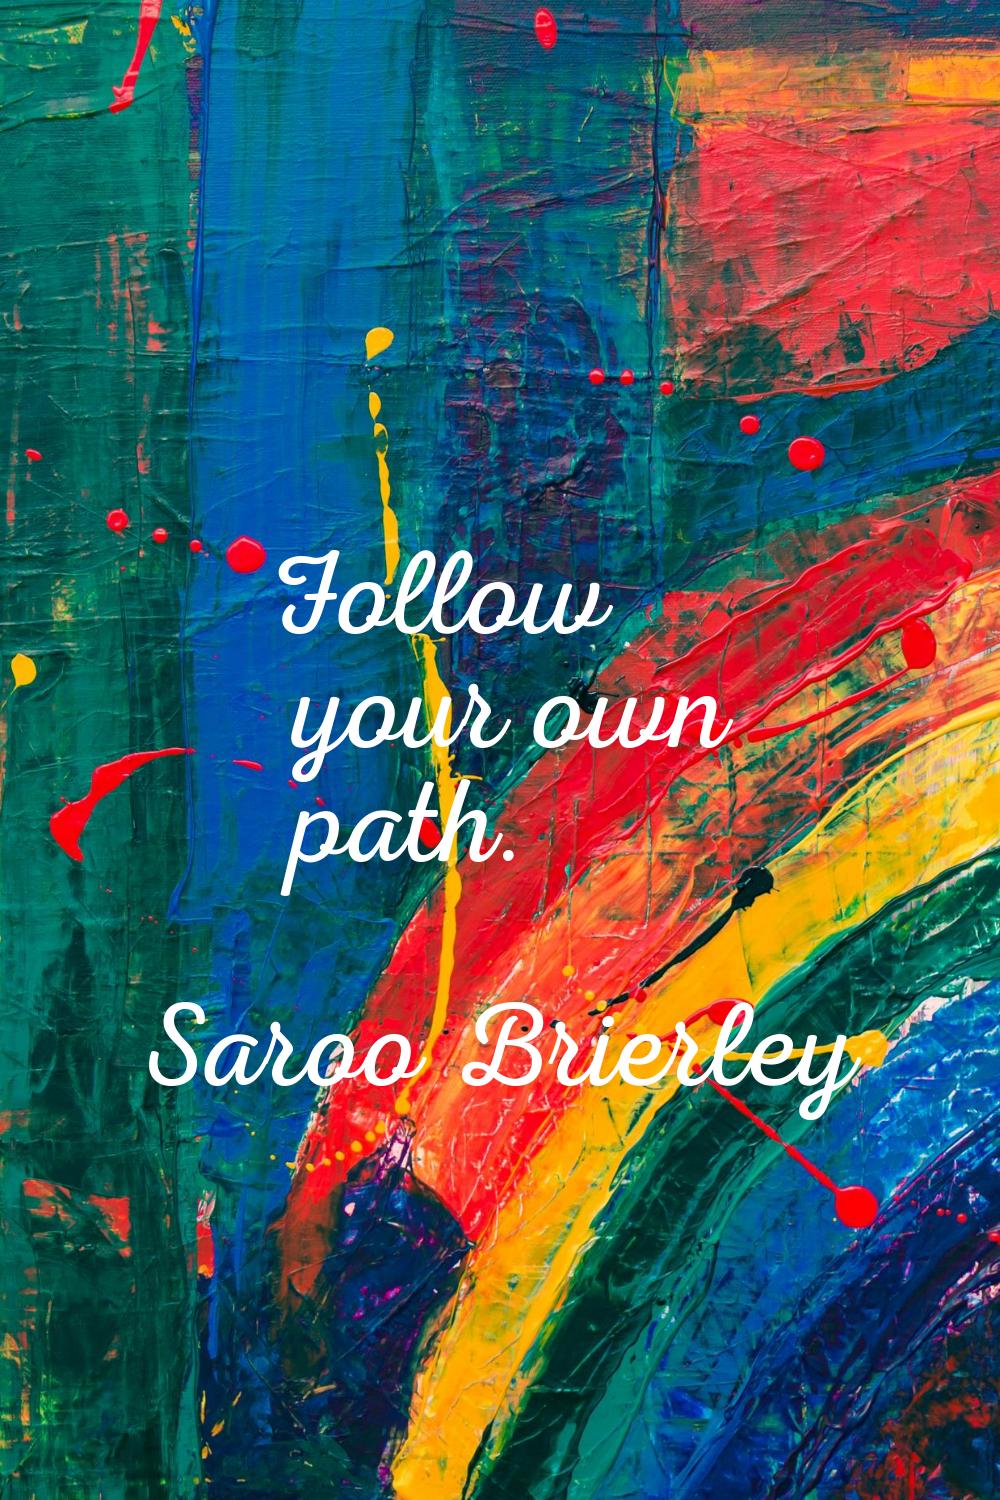 Follow your own path.